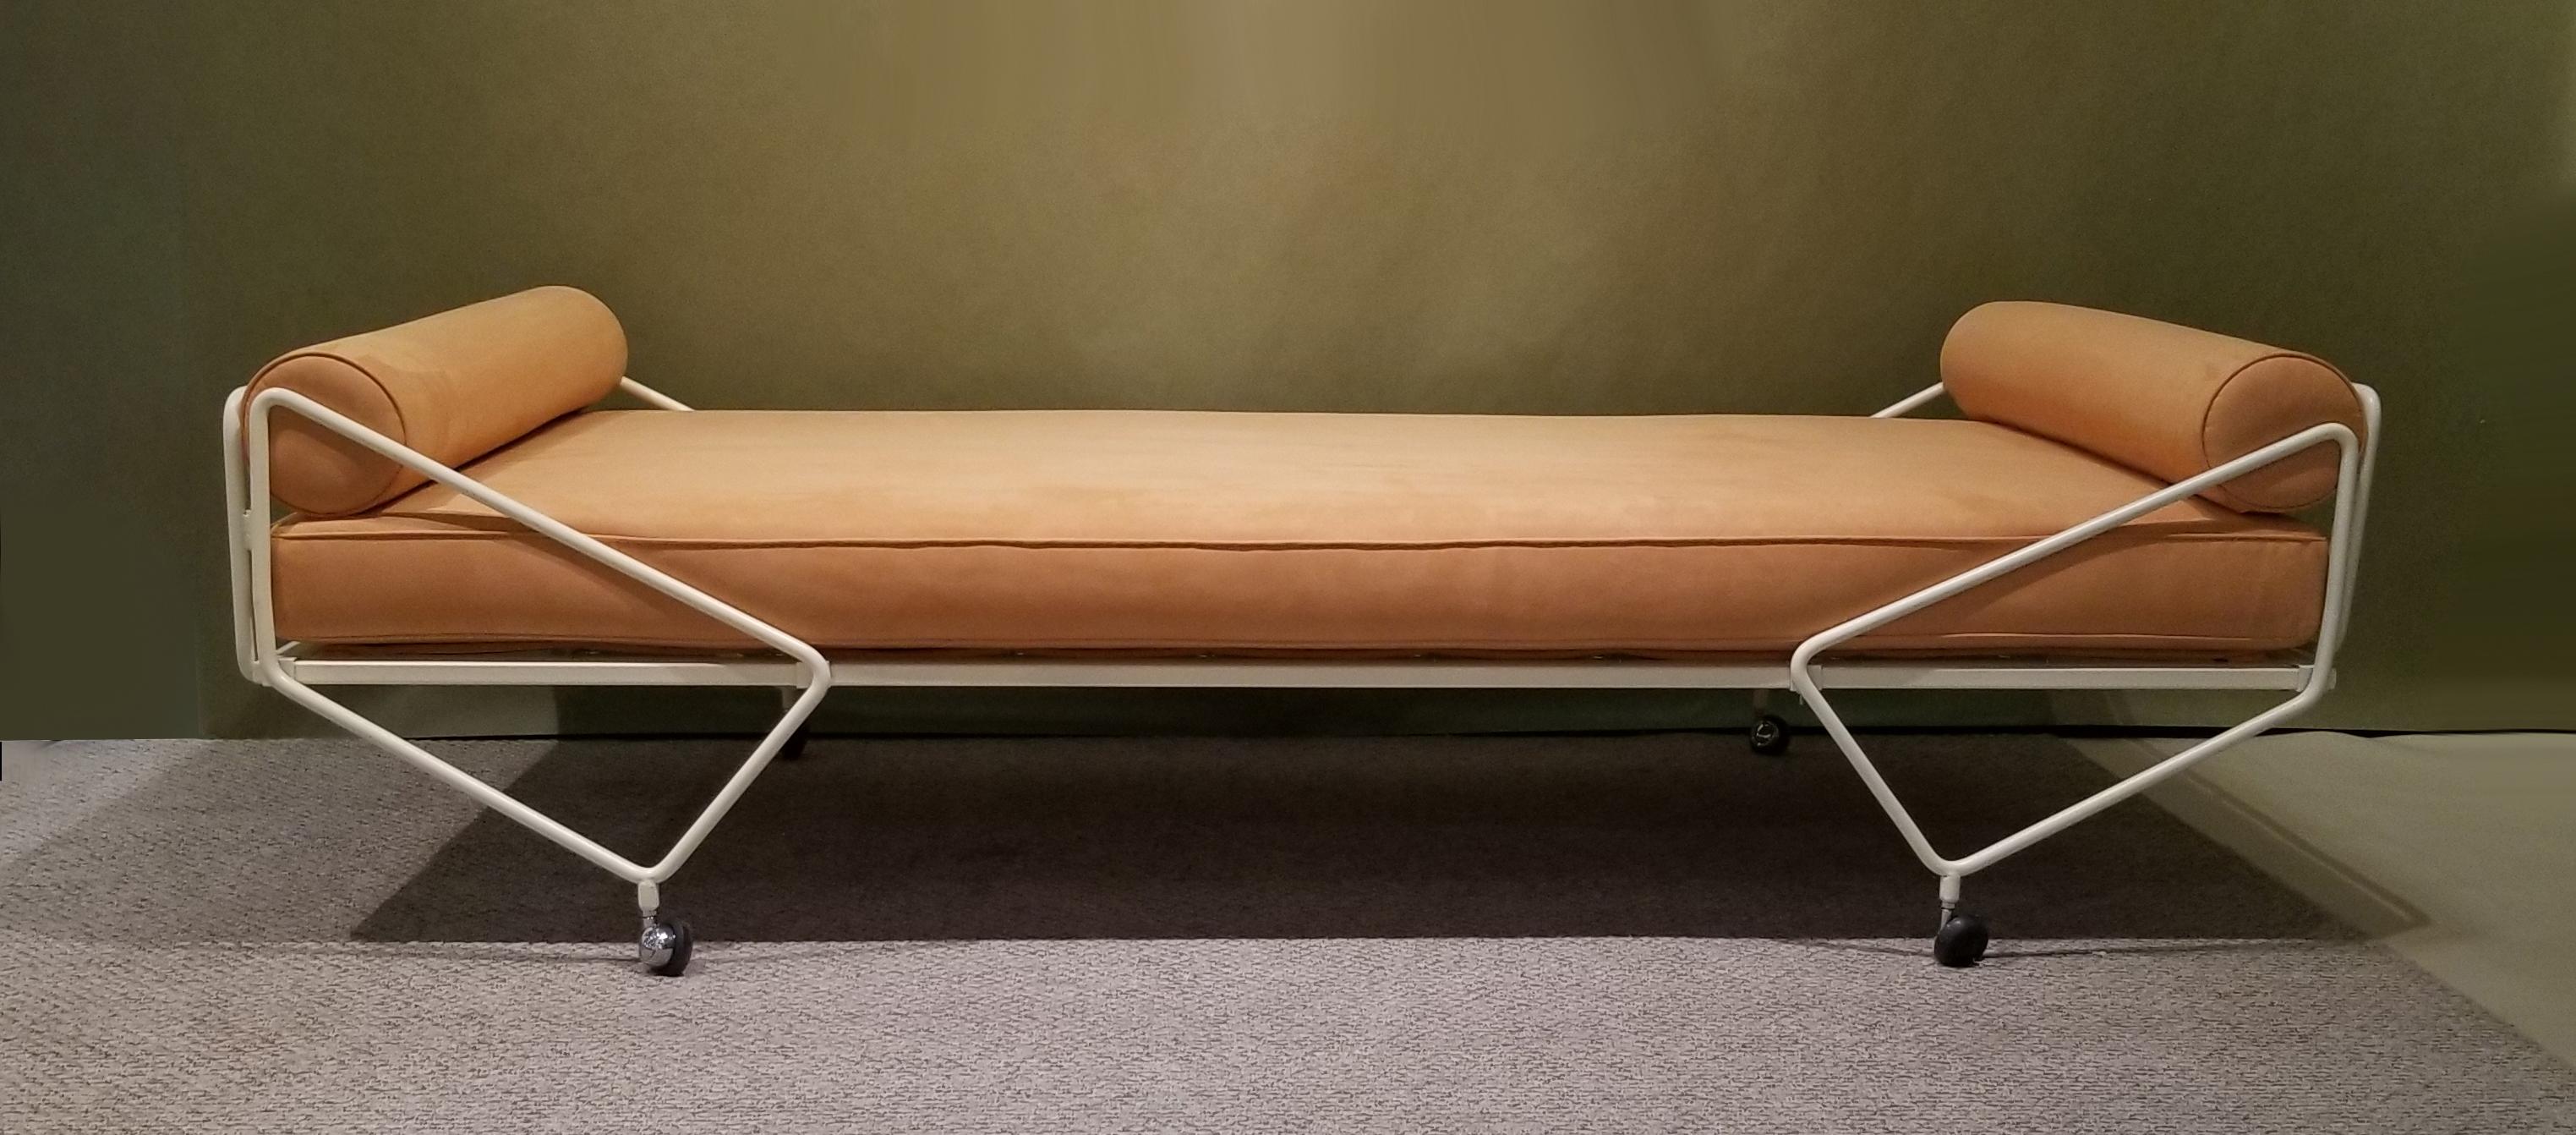 Includes a “Certificate of Authenticity” from Lisa Licitra Ponti and the Gio Ponti Archives. This beautiful minimalist daybed was restored in a soft satin crème lacquer and upholstered in a custom ordered ultra-suede. The cushion is hand-stitched so